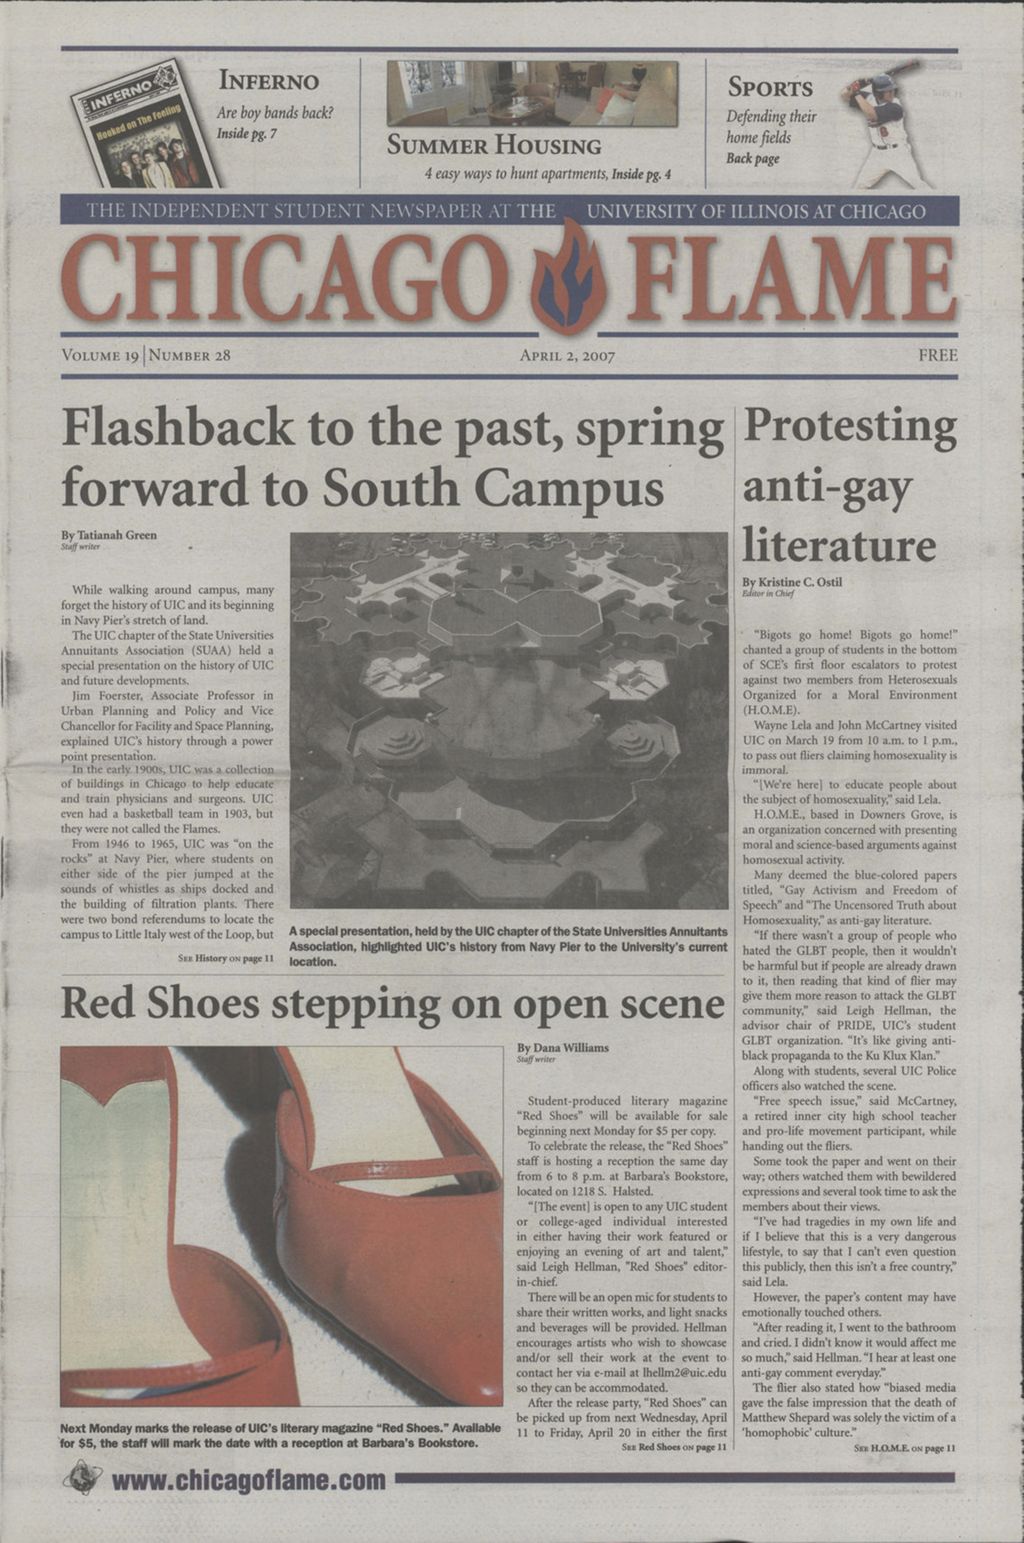 Chicago Flame (April 2, 2007)